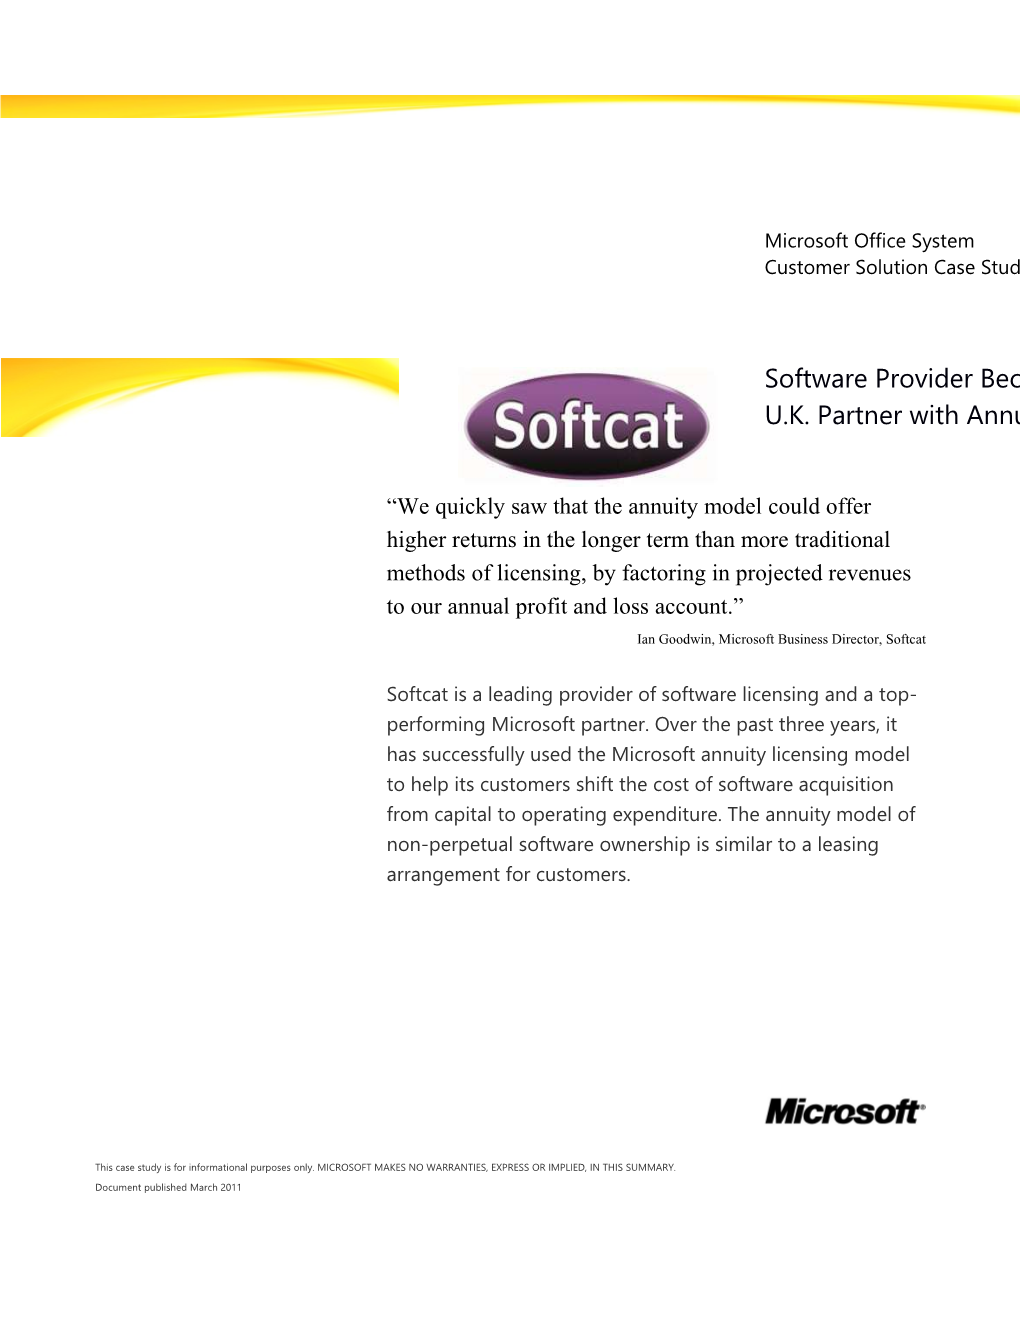 Writeimage CSB Annuity Licensing Model Helps Softcat Become Top-Performing U.K. Partner